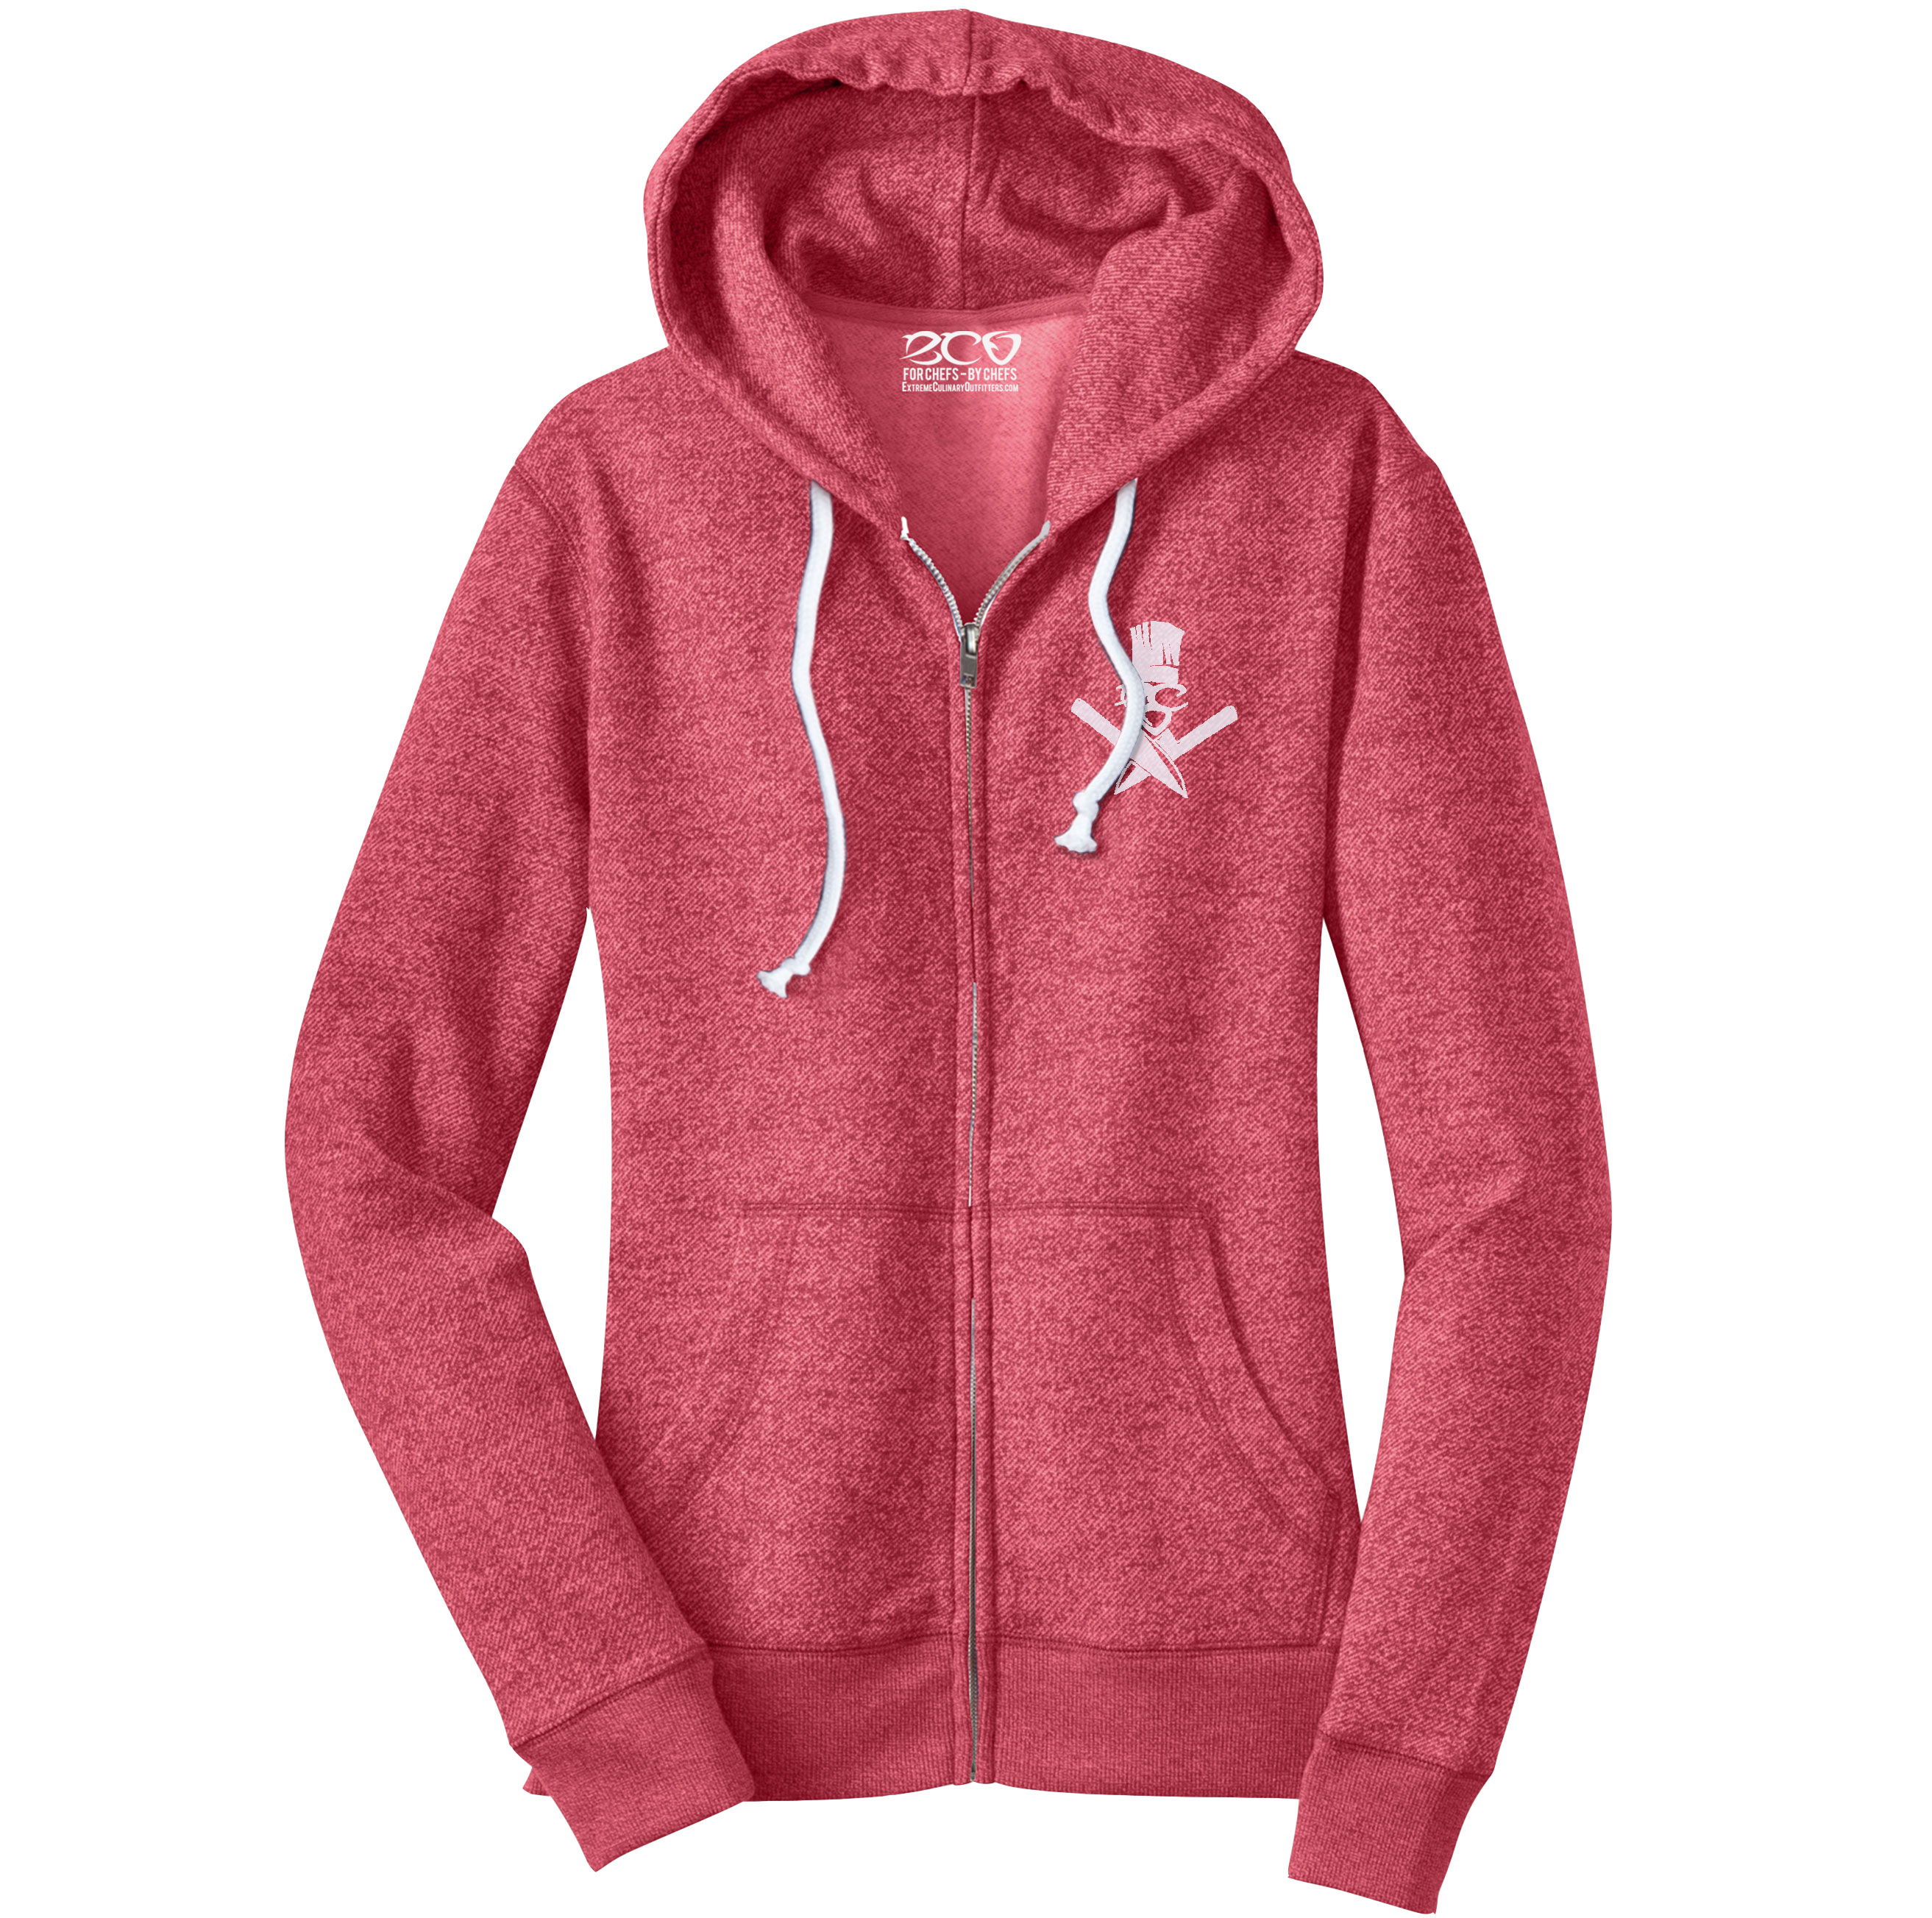 ladies hoodies u0026 sweatshirts archives - extreme culinary outfitters BYAUUXQ